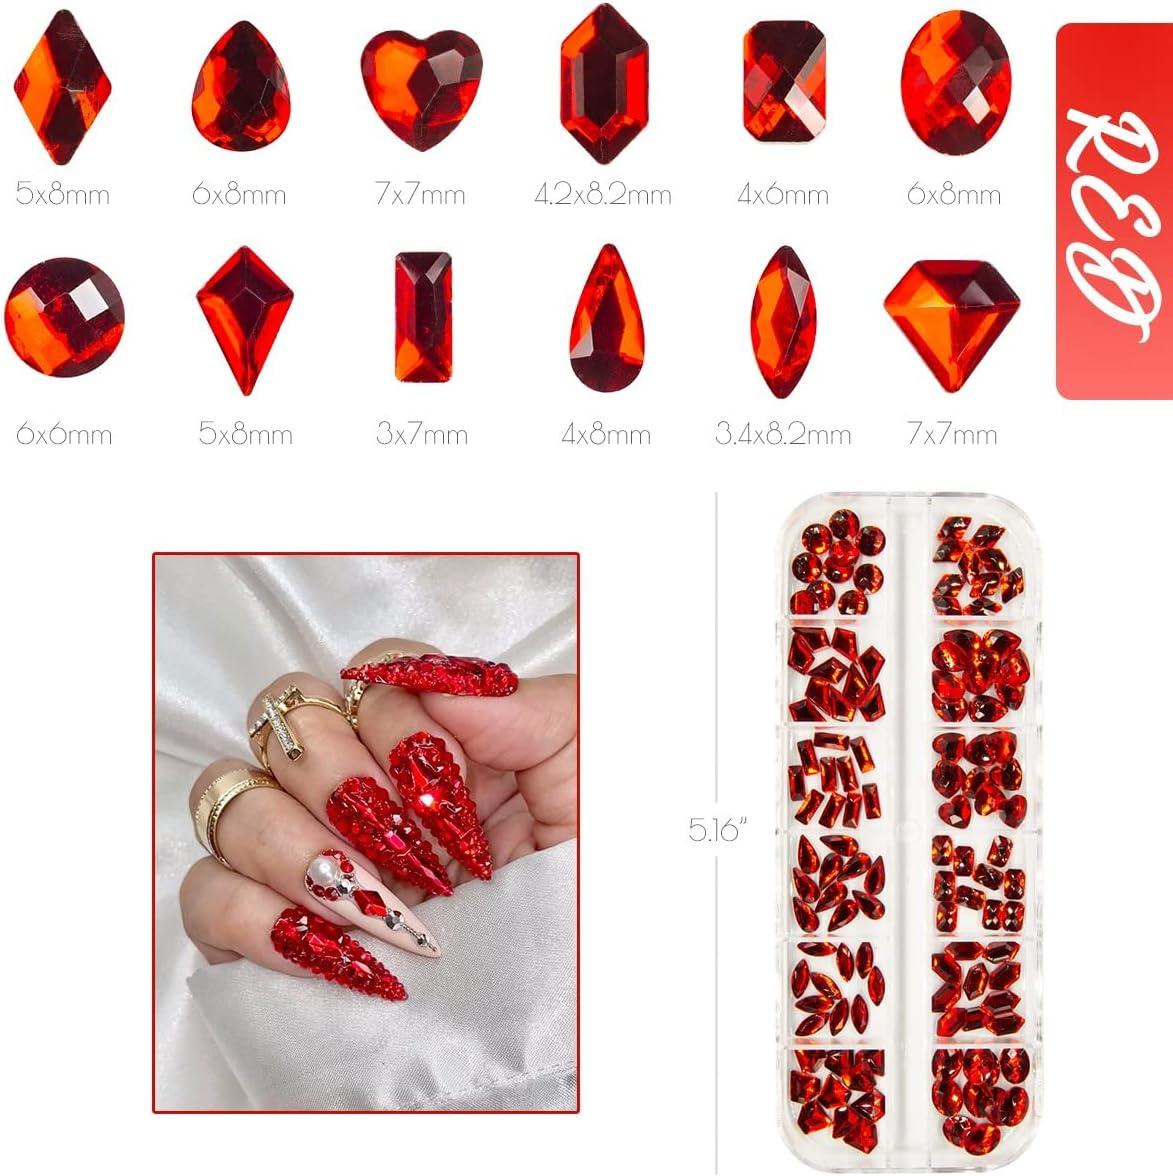 Stones Crystals Red Nails, Manicure Red Rhinestones